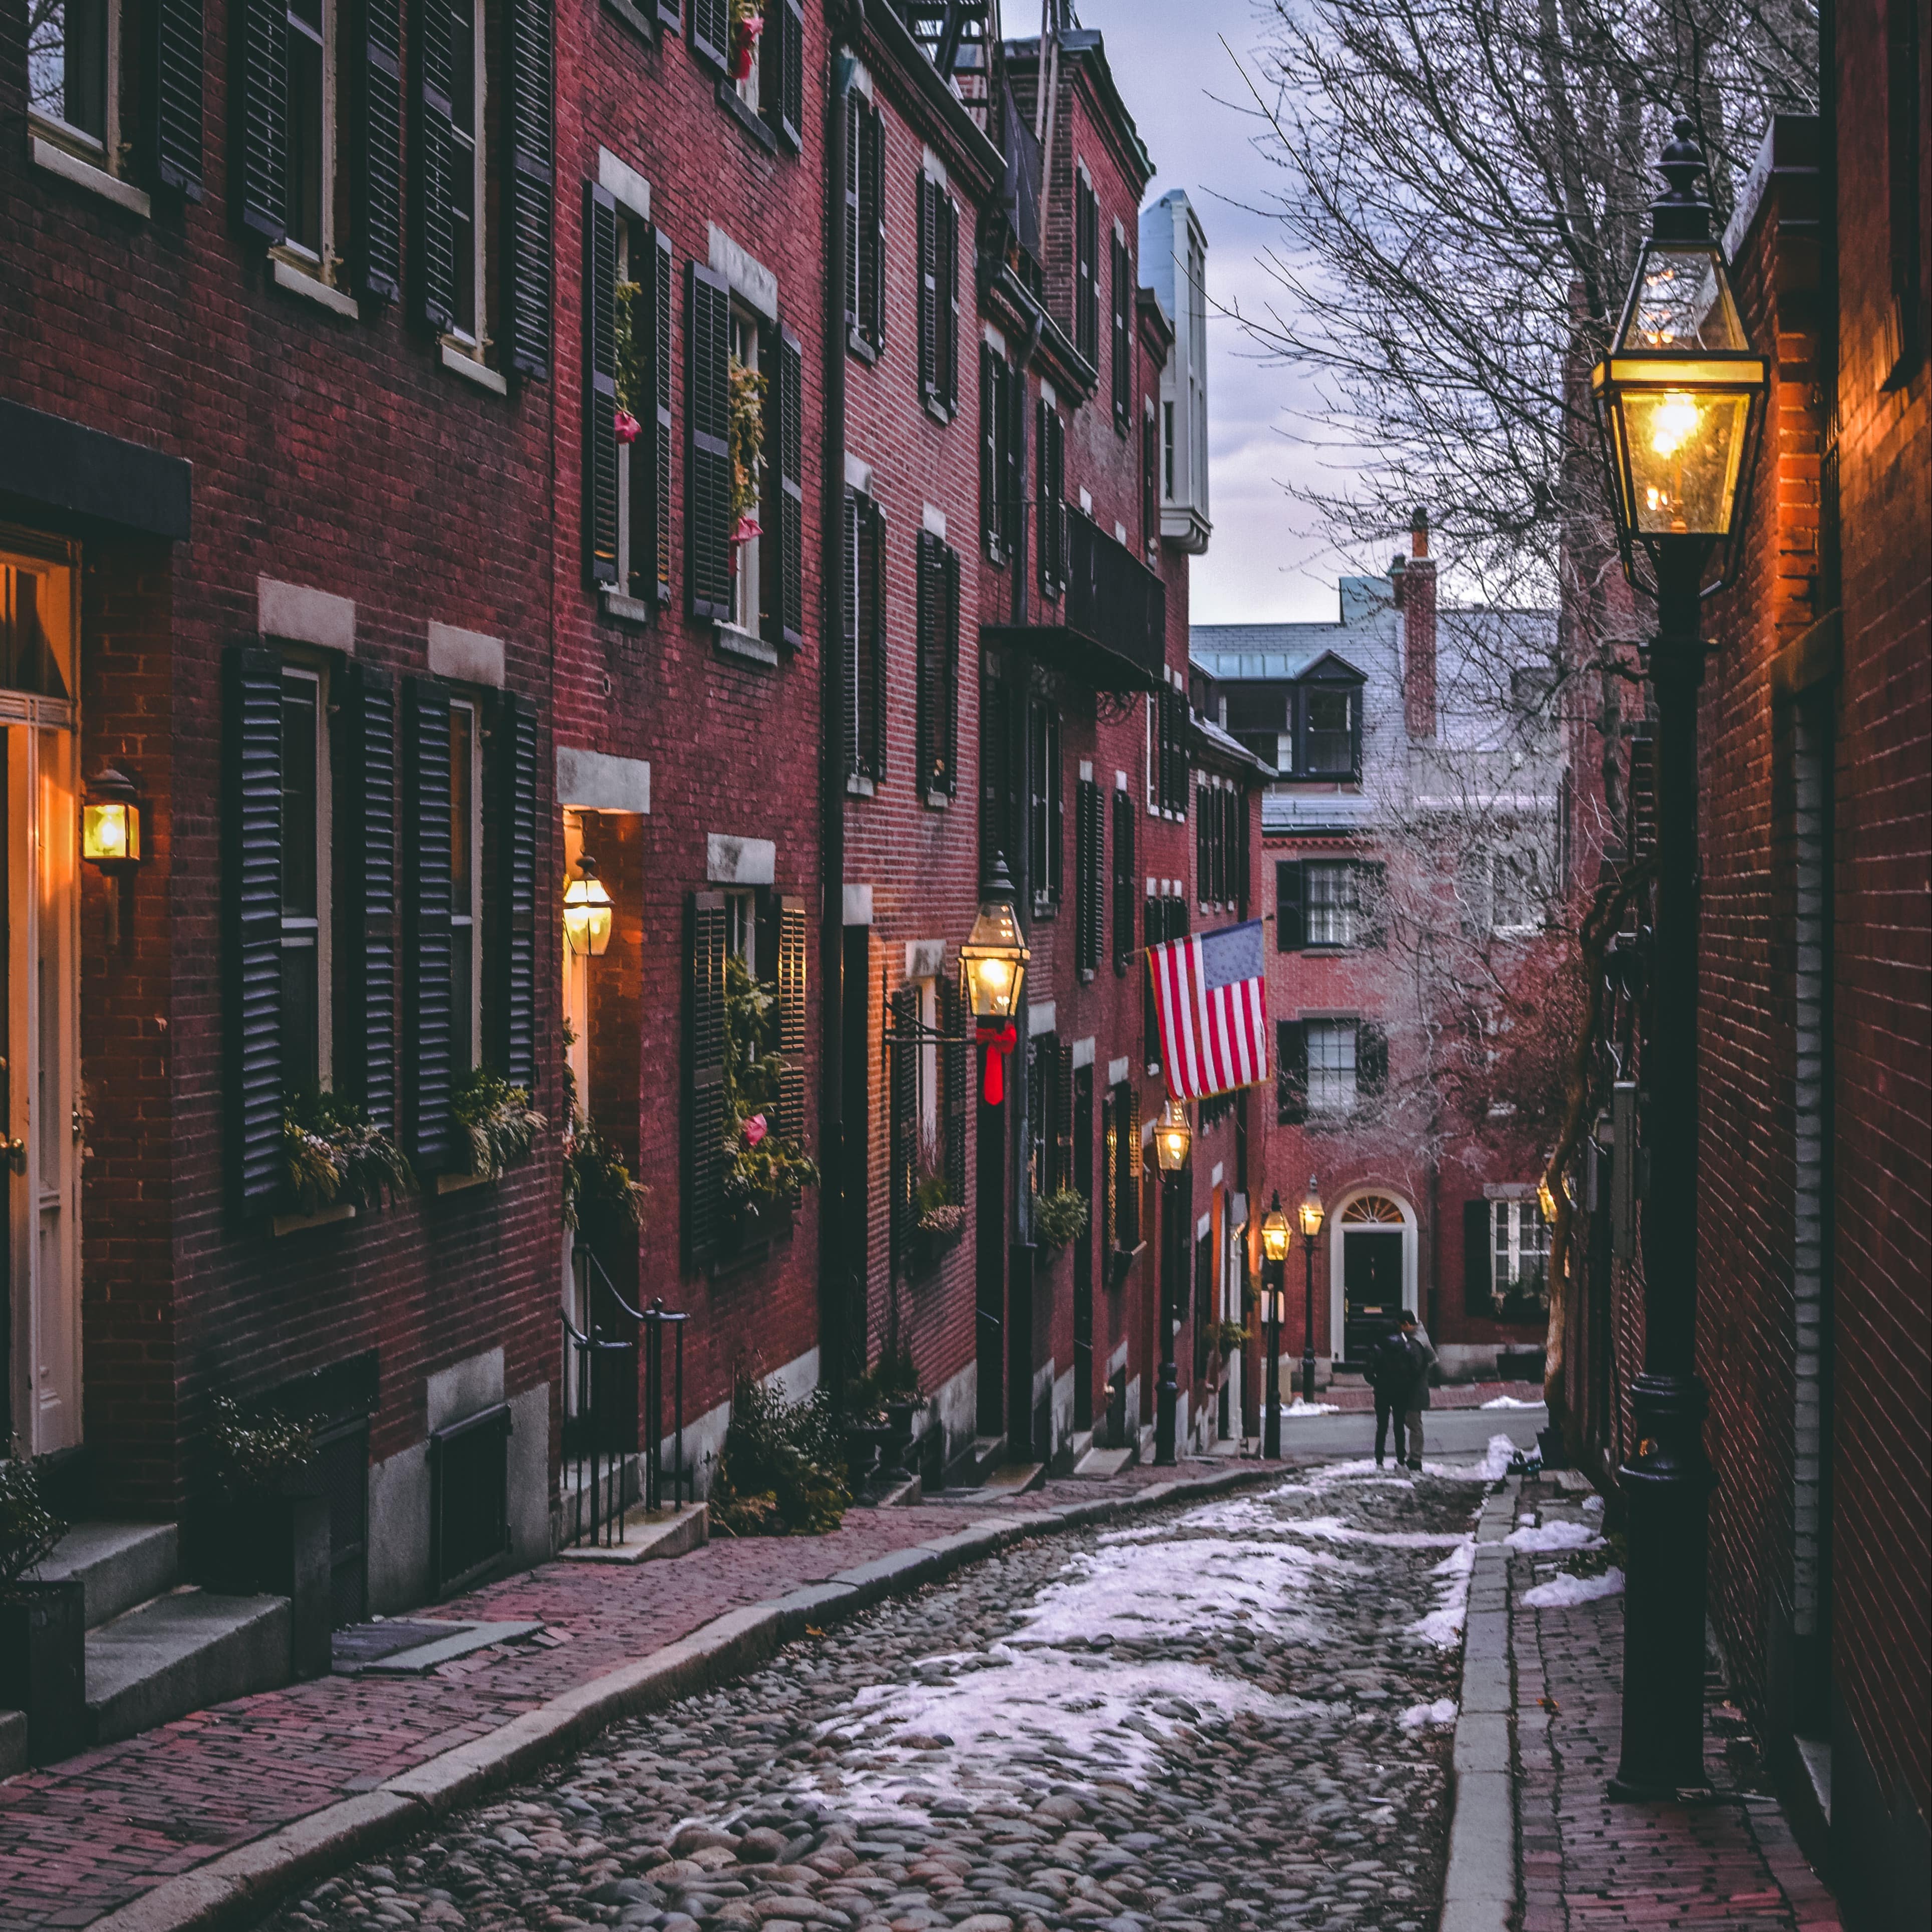 A cobblestone street lined with brick buildings in Boston, MA